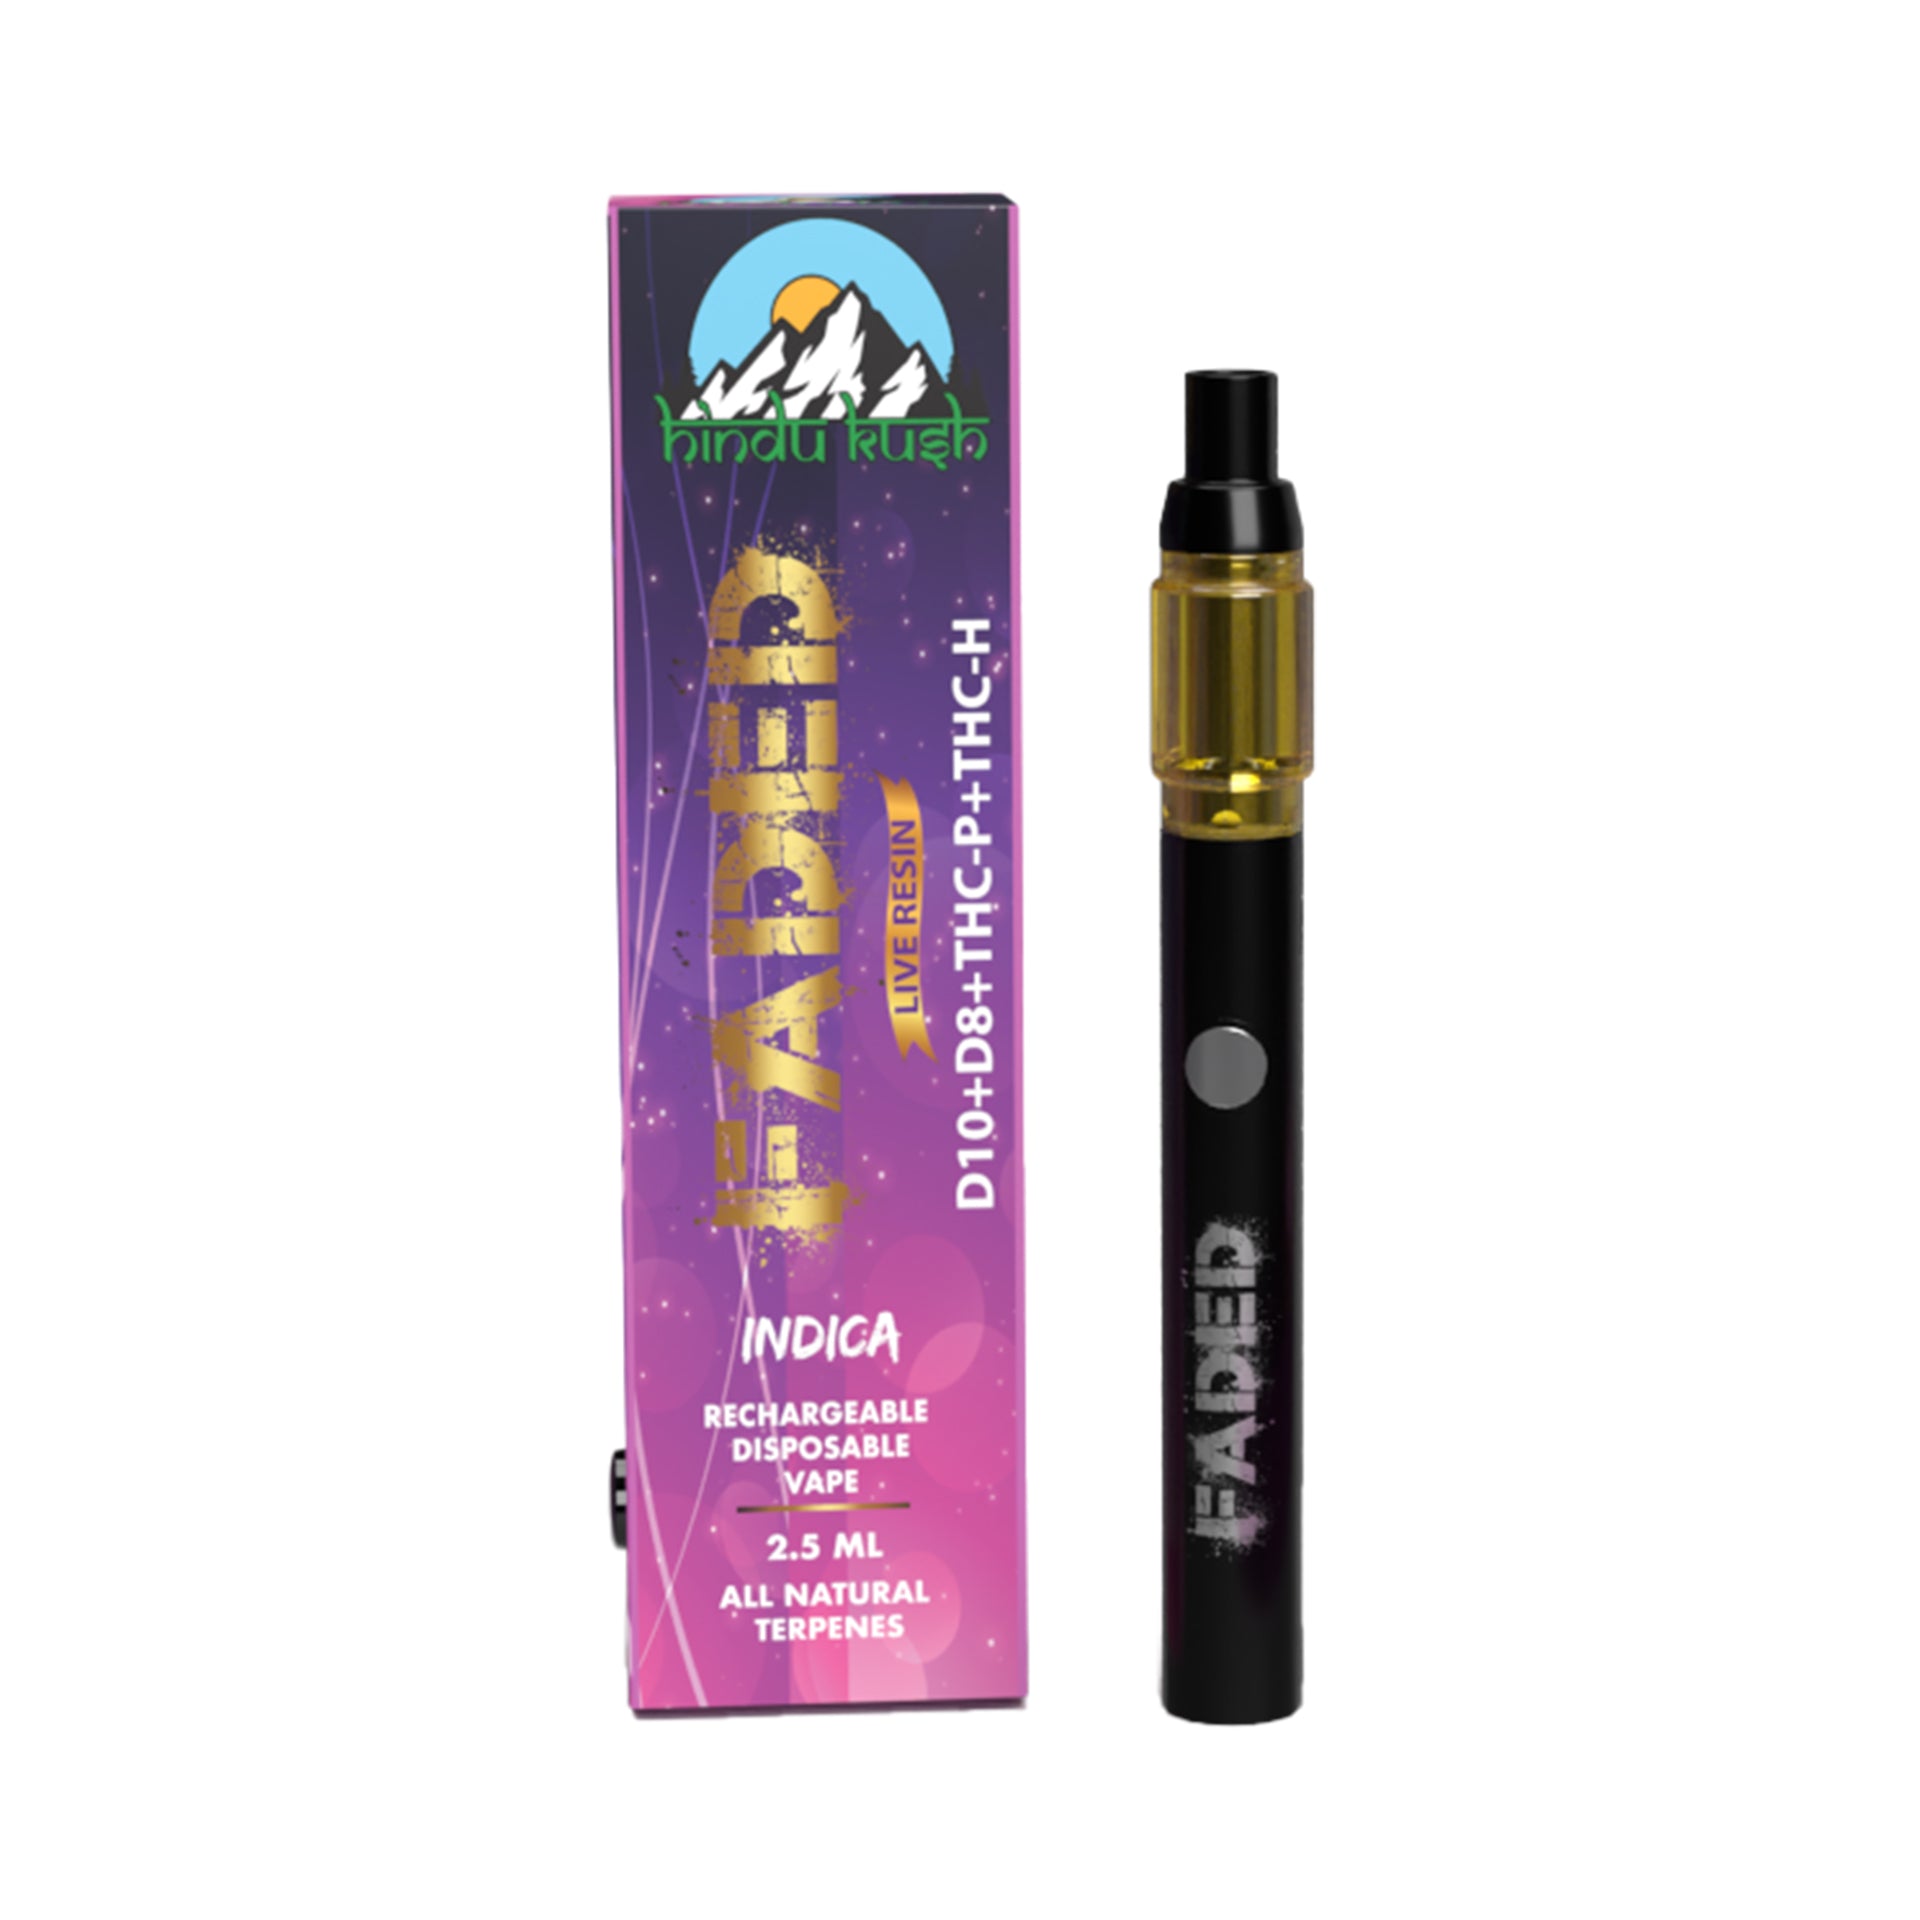 FADED D-10+D-8+THC-P+THC-H LIVE RESIN RECHARGEABLE DISPOSABLE - INDICA HINDU KUSH 2.5ML